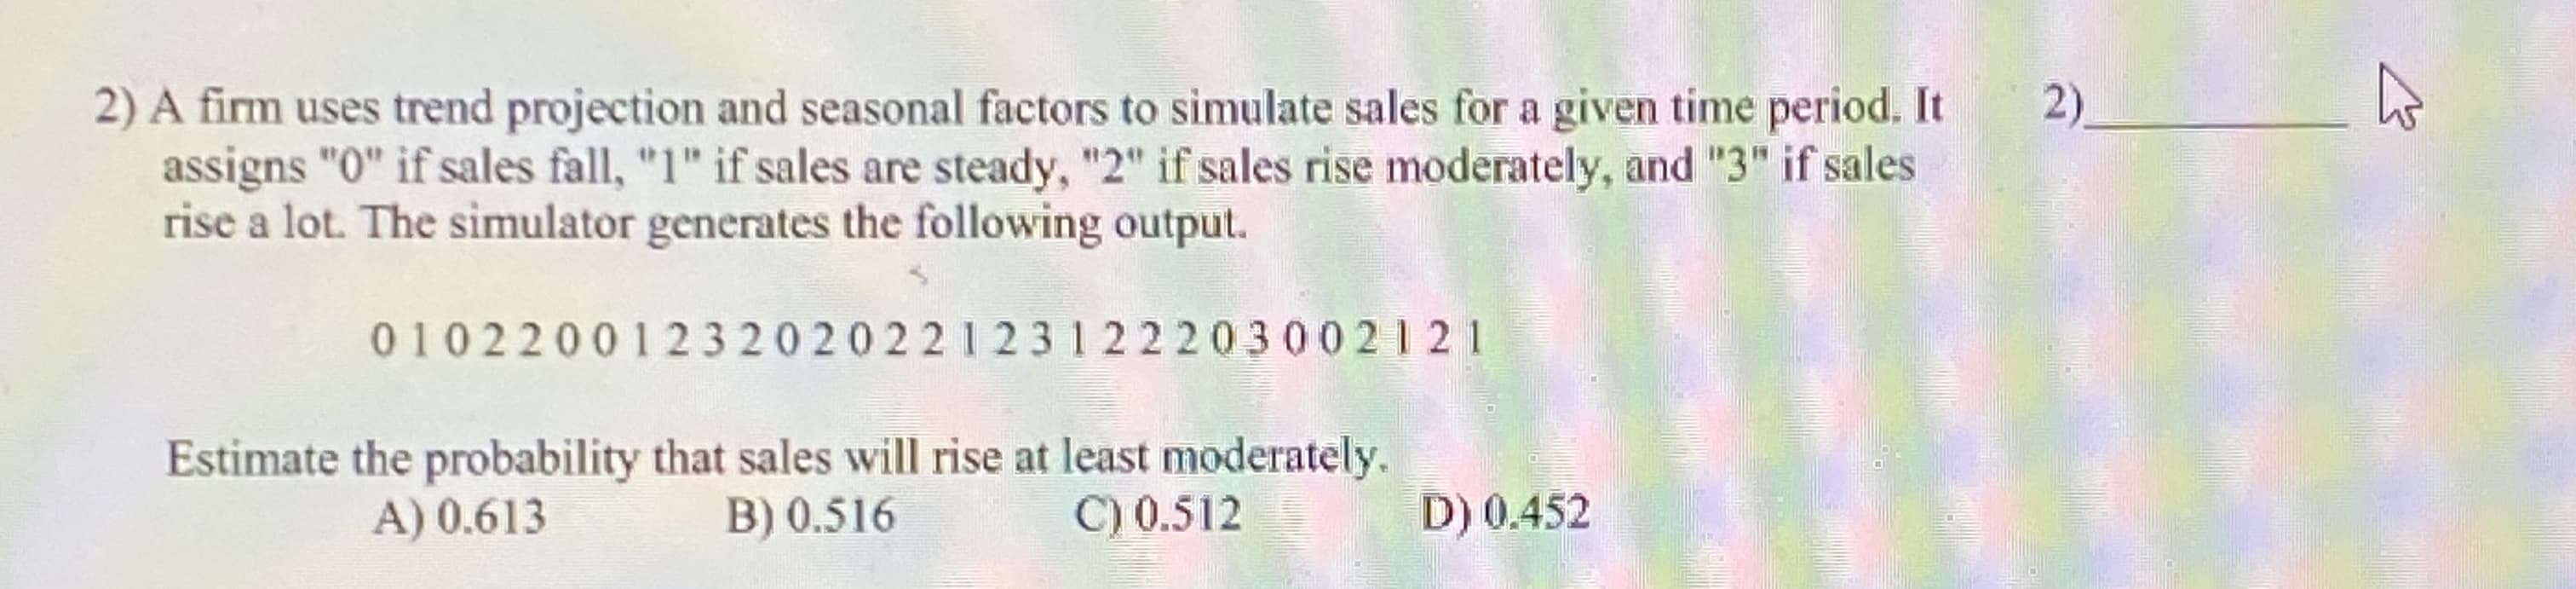 A firm uses trend projection and seasonal factors to simulate sales for a given time period. It
assigns "0" if sales fall, "1" if sales are steady, "2" if sales rise moderately, and "3" if sales
rise a lot. The simulator generates the following output.
0102200123202022123122203002121
Estimate the probability that sales will rise at least moderately.
B) 0.516
A) 0.613
C) 0.512=
D) 0.452
